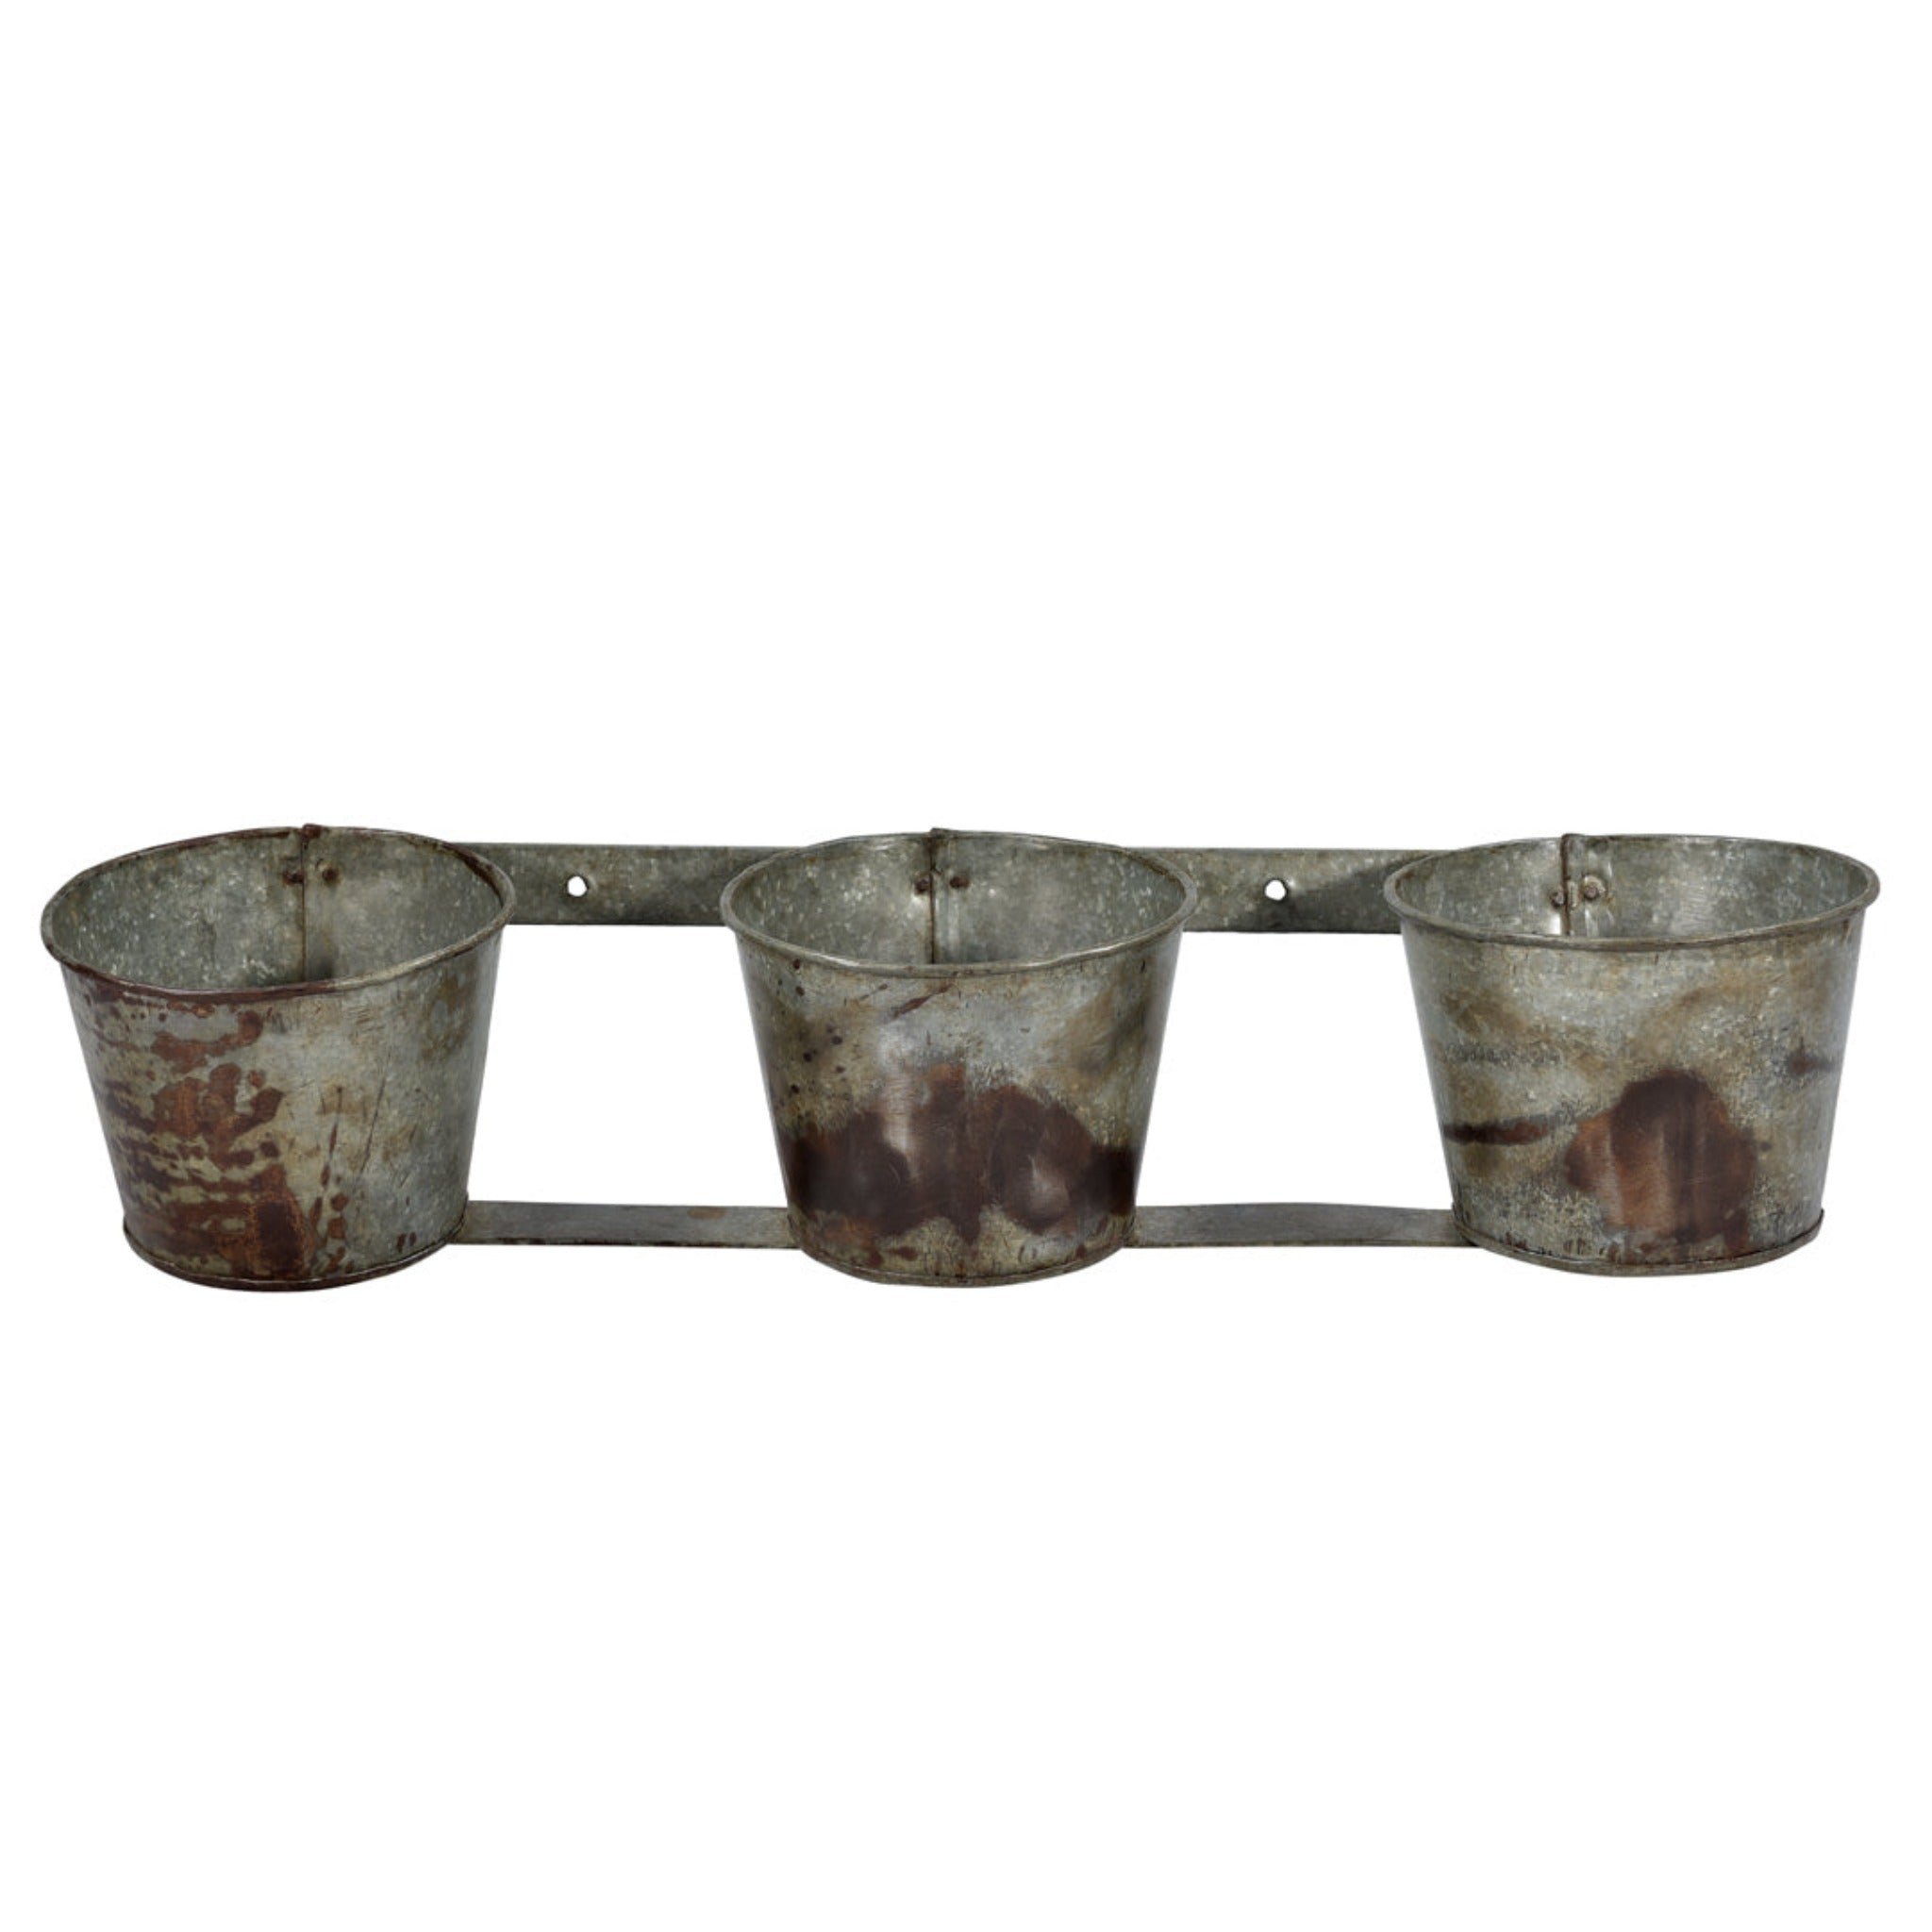 Wall Hanging 3 Zinc Pot Planters front view of distressed metal